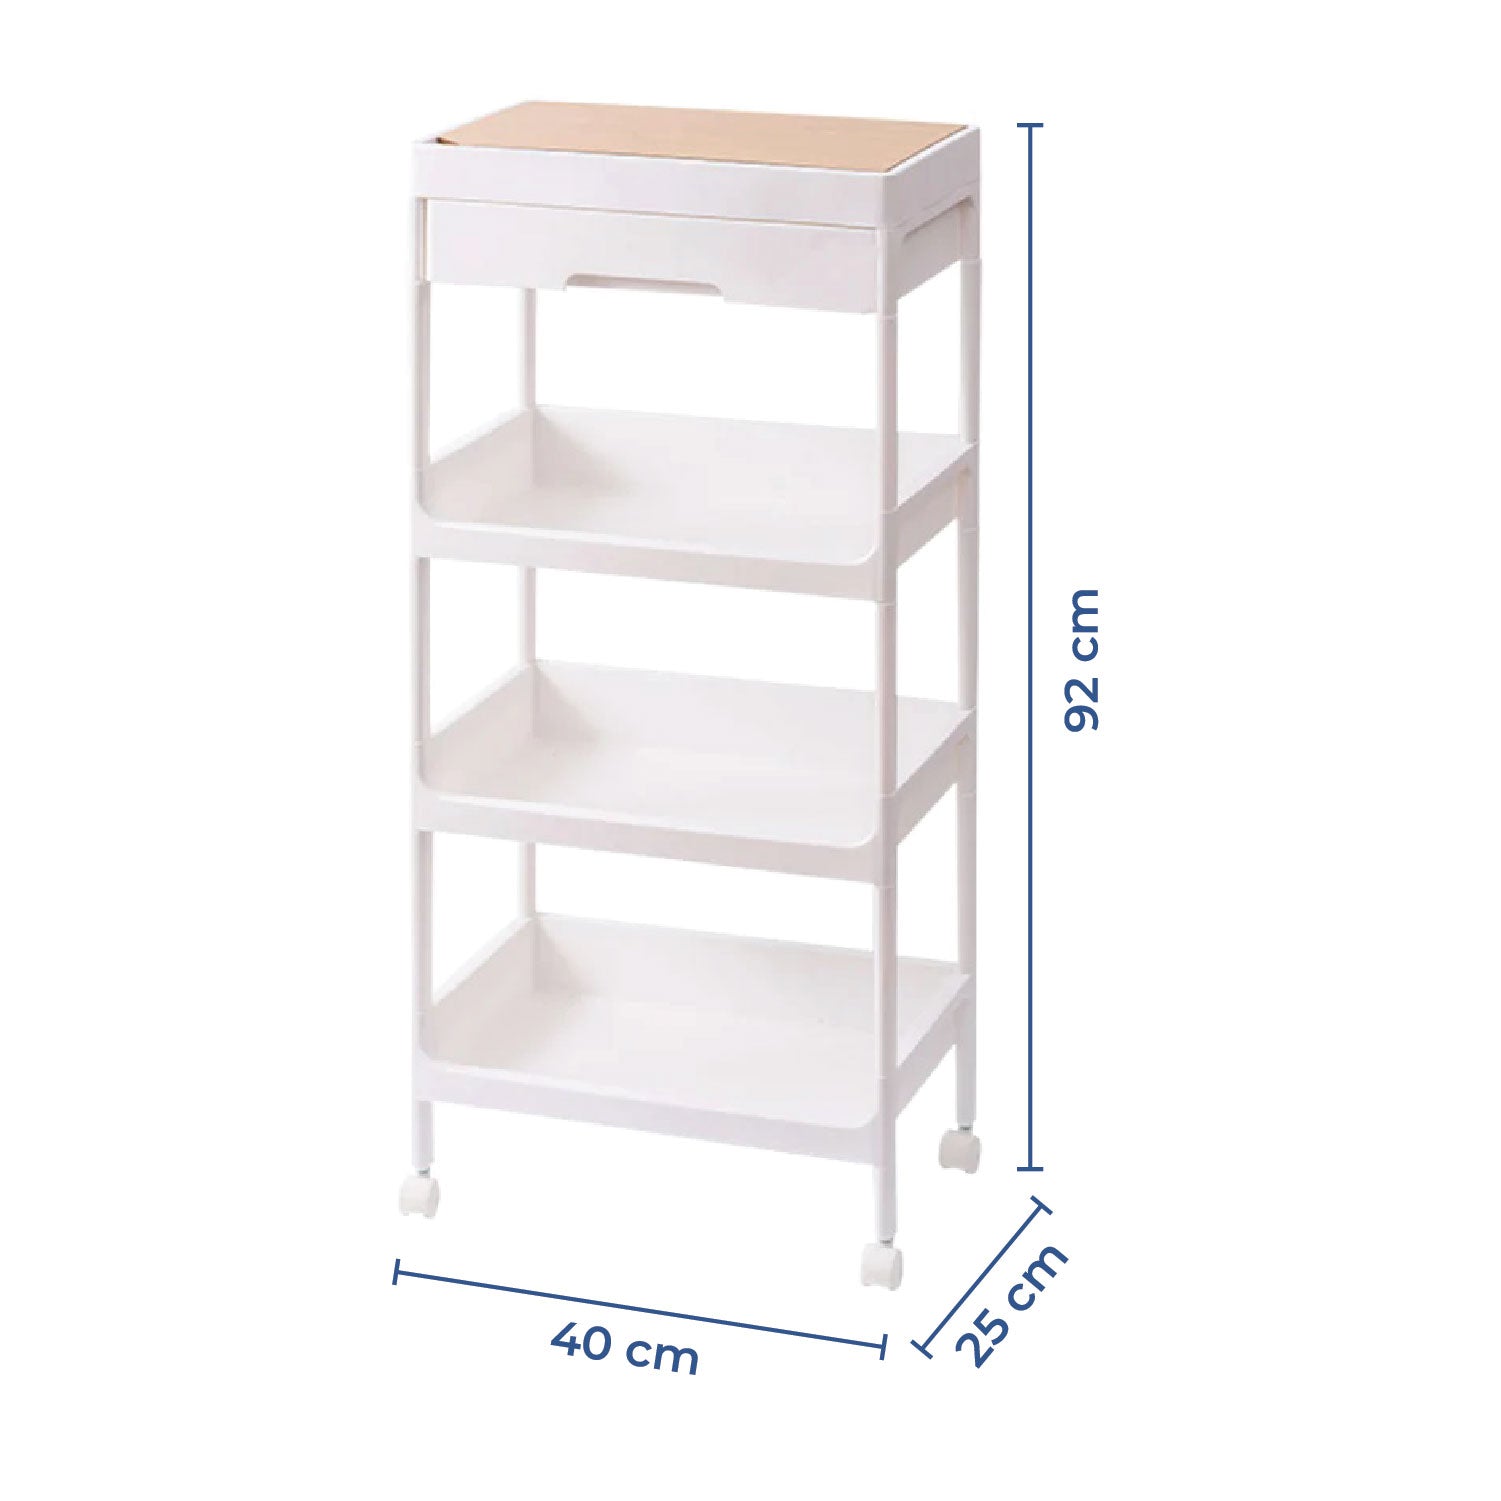 Move Ease / Multipurpose Space Saving Storage Rack / 3 Tier Shelf for Kitchen And Bedroom Organizers